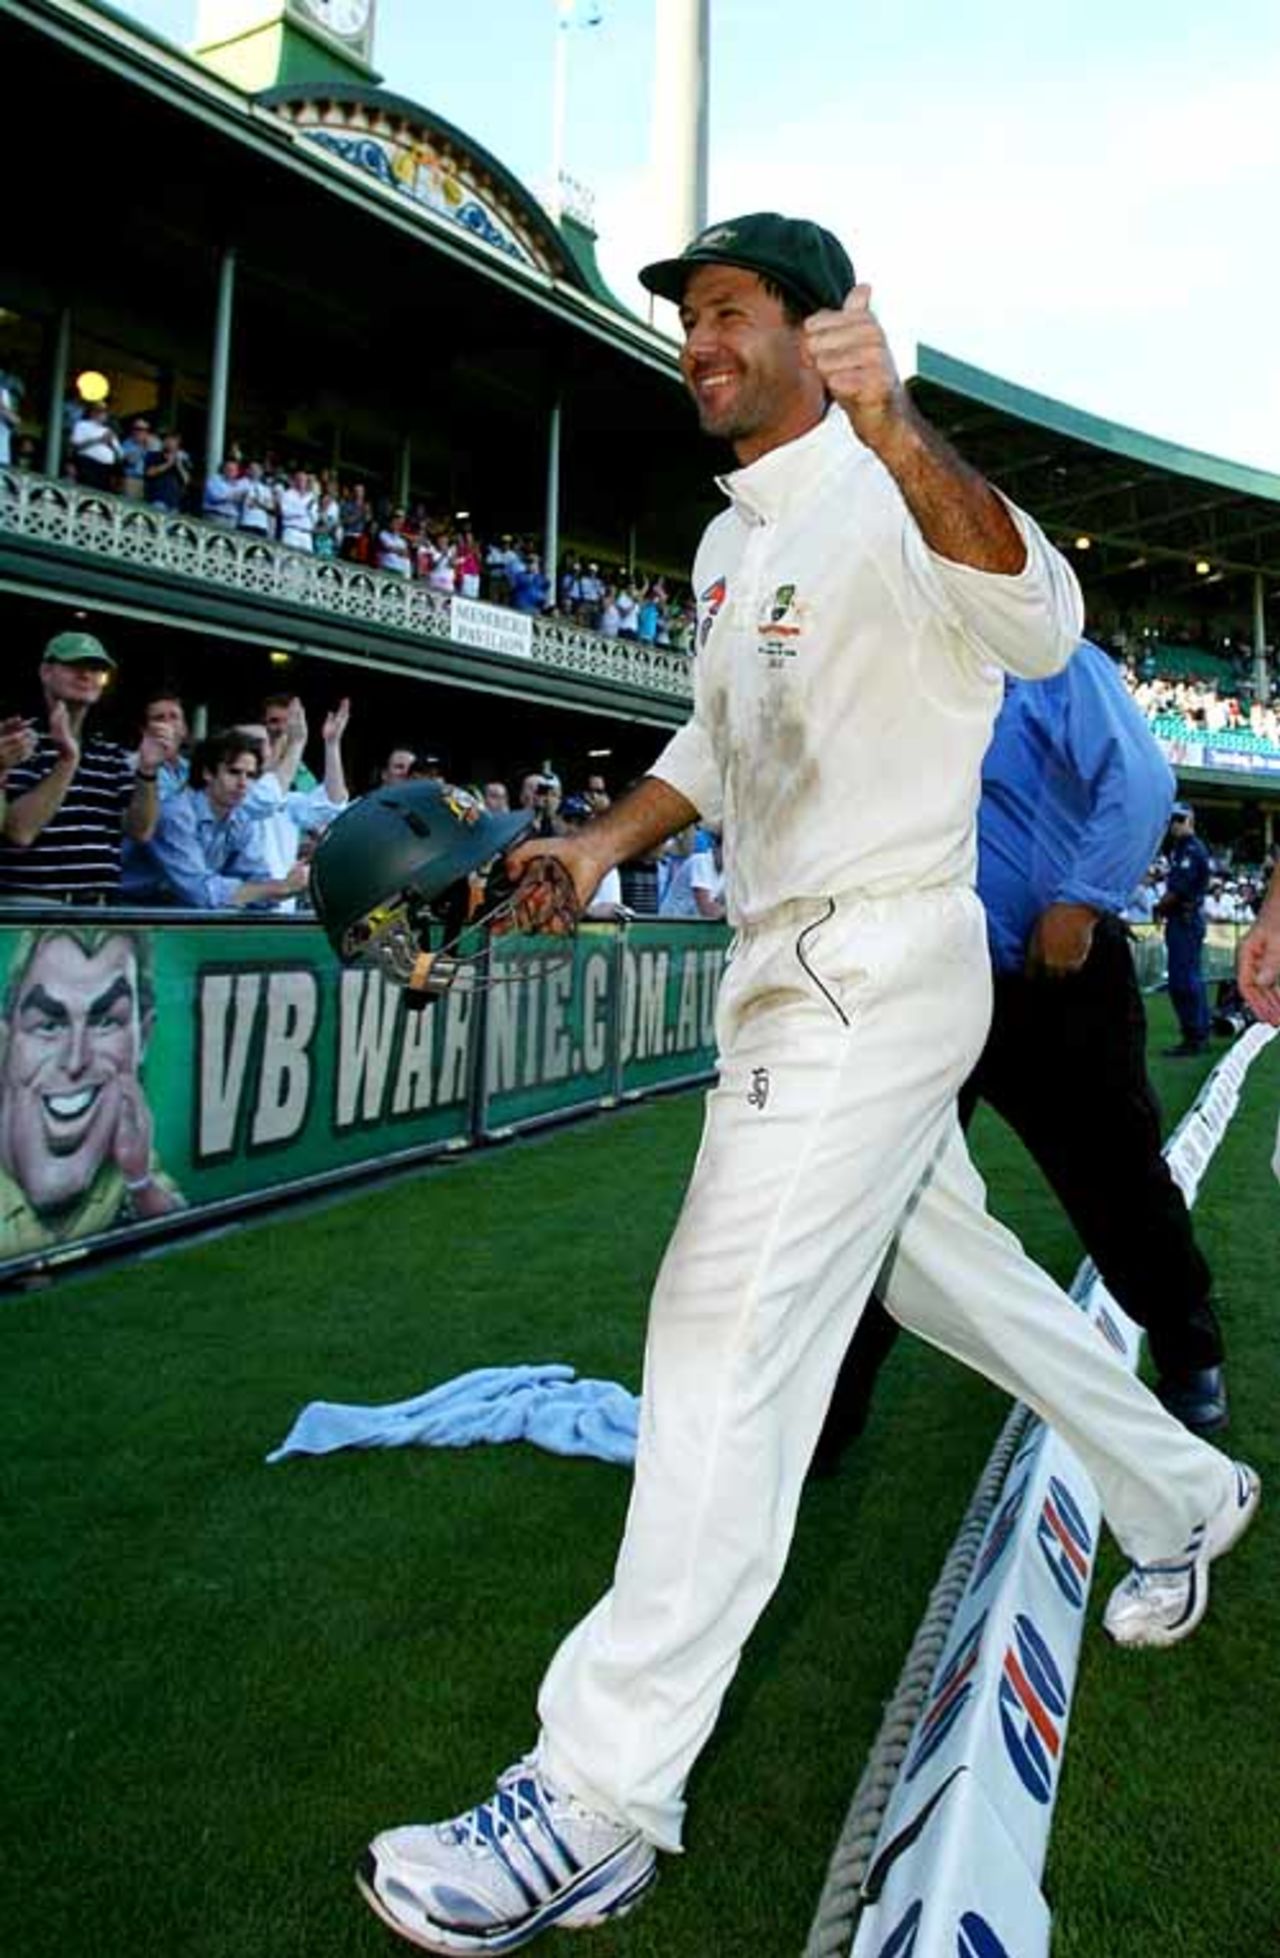 A thumbs up from Ricky Ponting as he leaves the field, Australia v India, 2nd Test, Sydney, 5th day, January 6, 2008